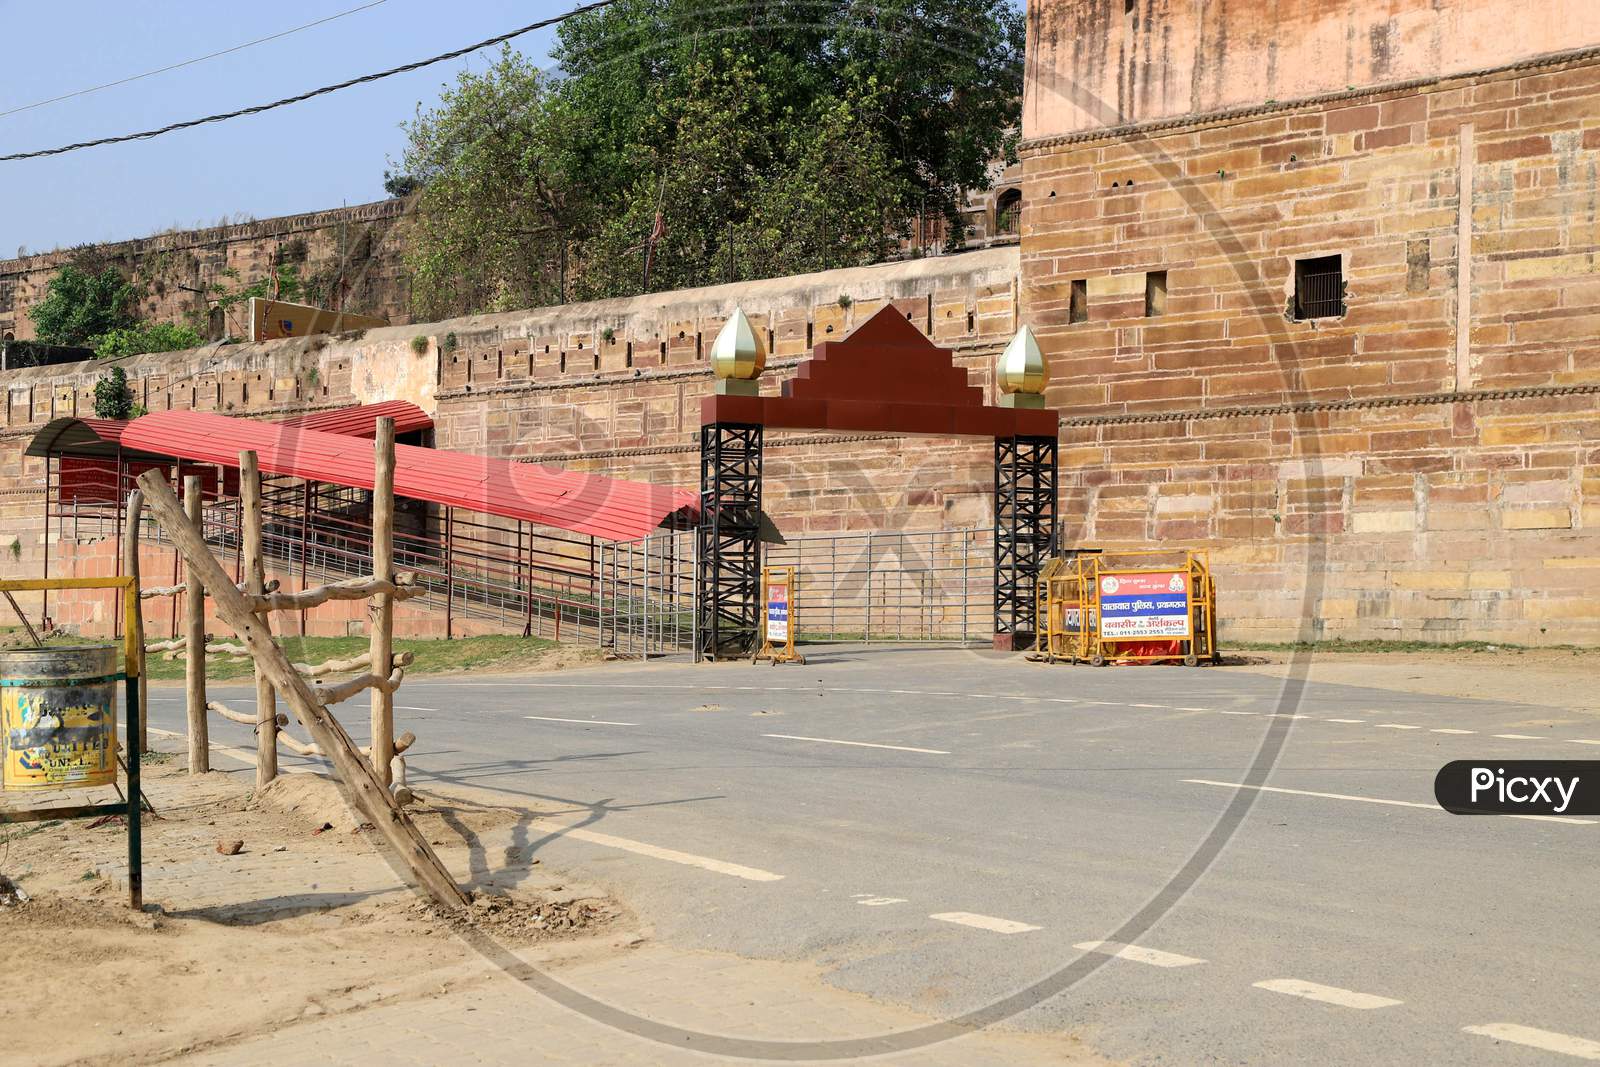 A View Of Closed AkshayavatTemple During A Nationwide Lockdown To Slow The Spreading Of The Coronavirus Disease (Covid-19), In Prayagraj, April, 15, 2020.